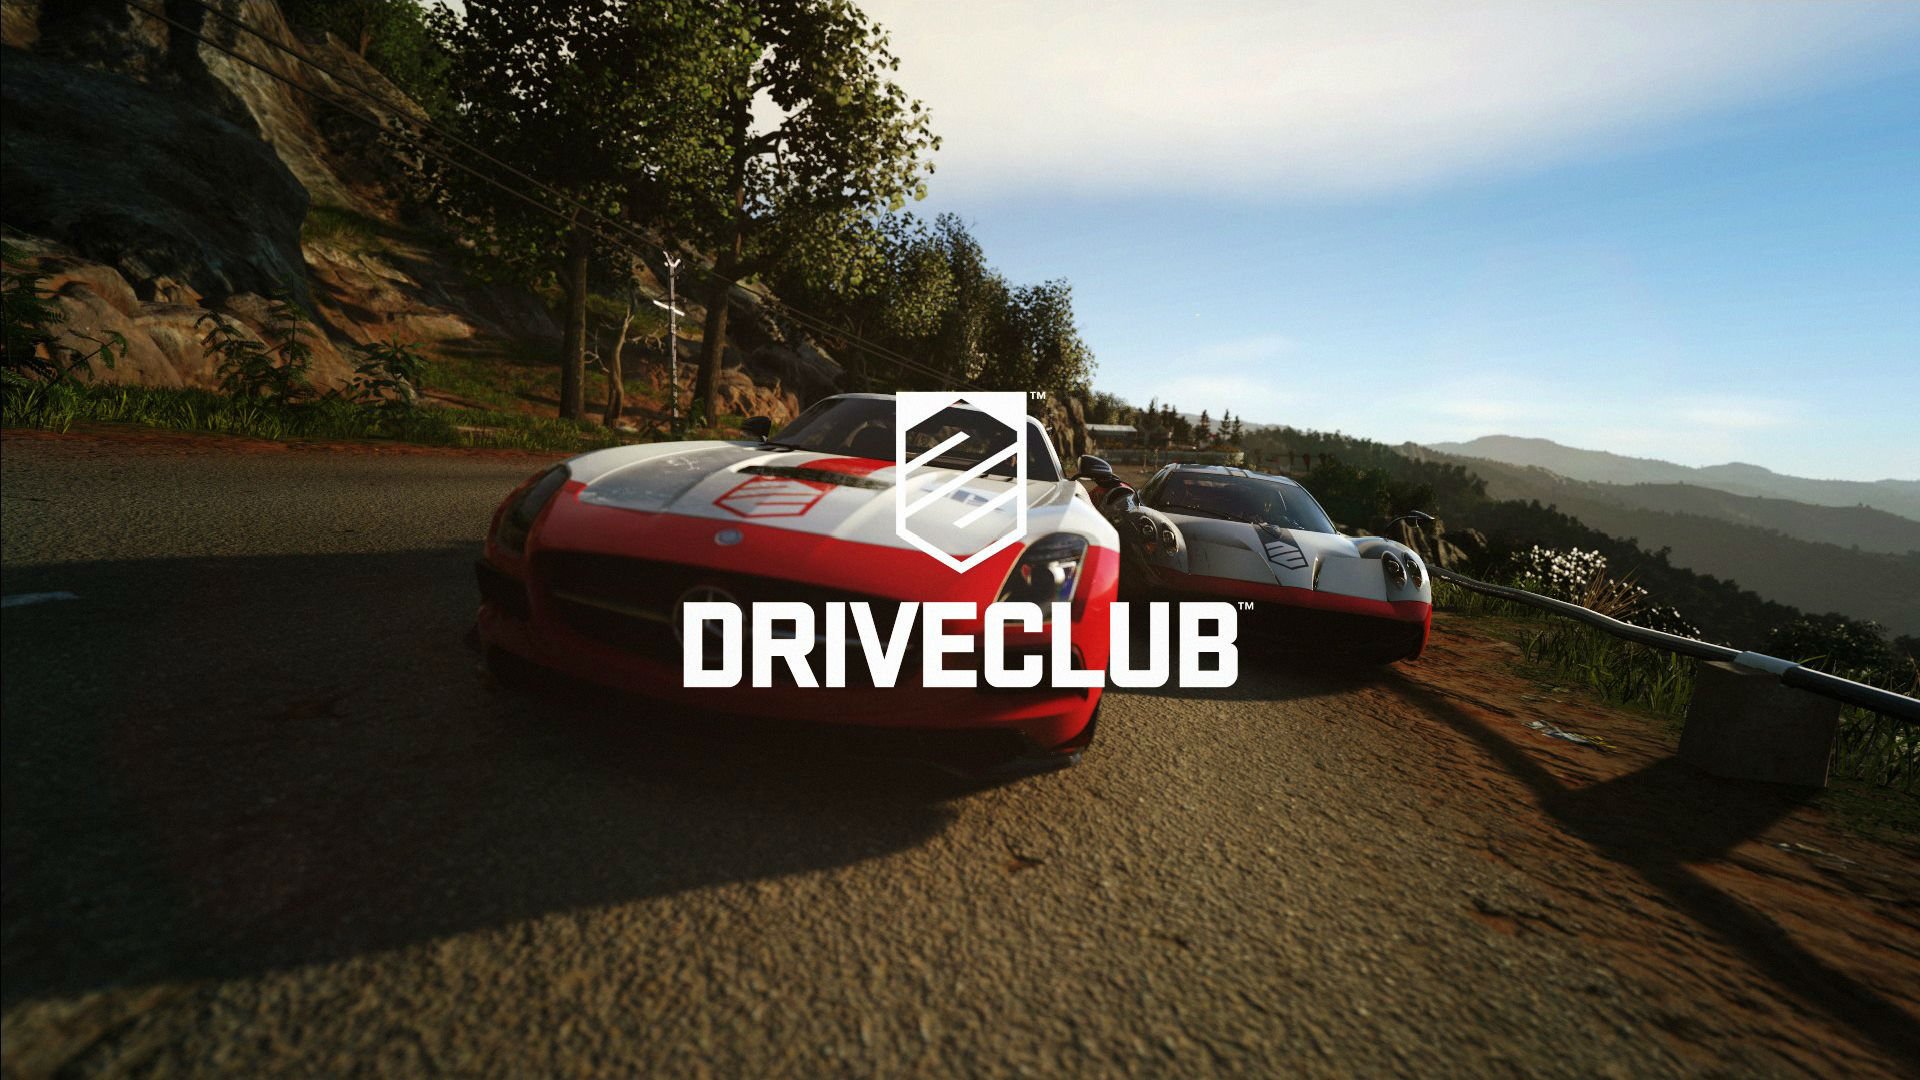 driveclub, Racing, Action, Race, Supercar, Game, Poster Wallpaper